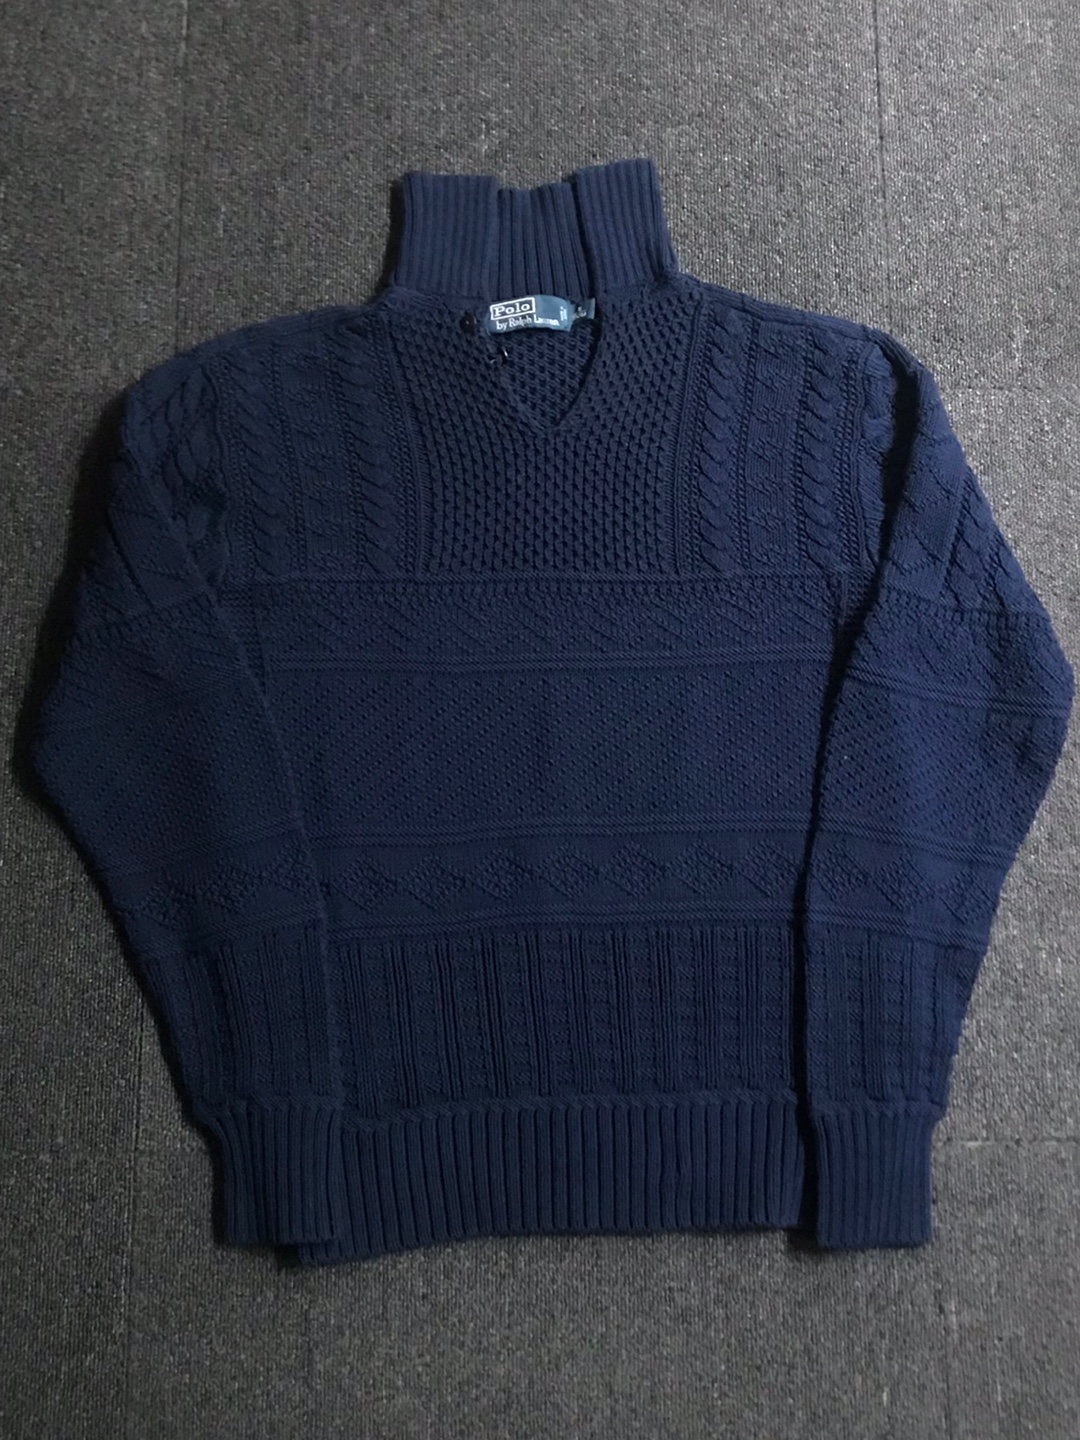 Polo RL cotton pattern cable sweater (M size, ~103 추천)